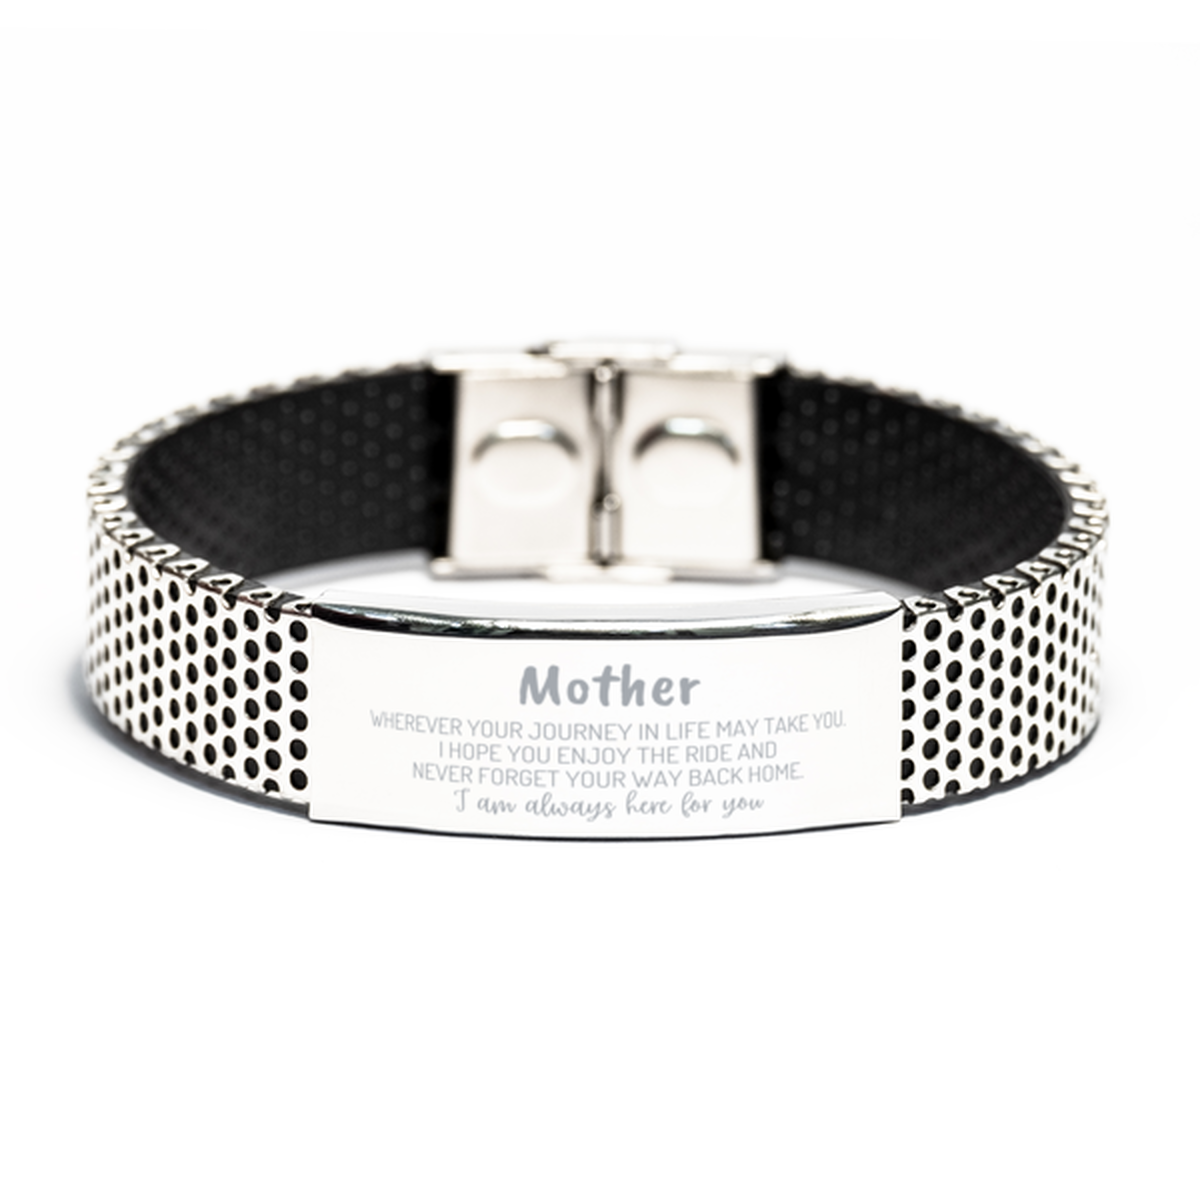 Mother wherever your journey in life may take you, I am always here for you Mother Stainless Steel Bracelet, Awesome Christmas Gifts For Mother, Mother Birthday Gifts for Men Women Family Loved One